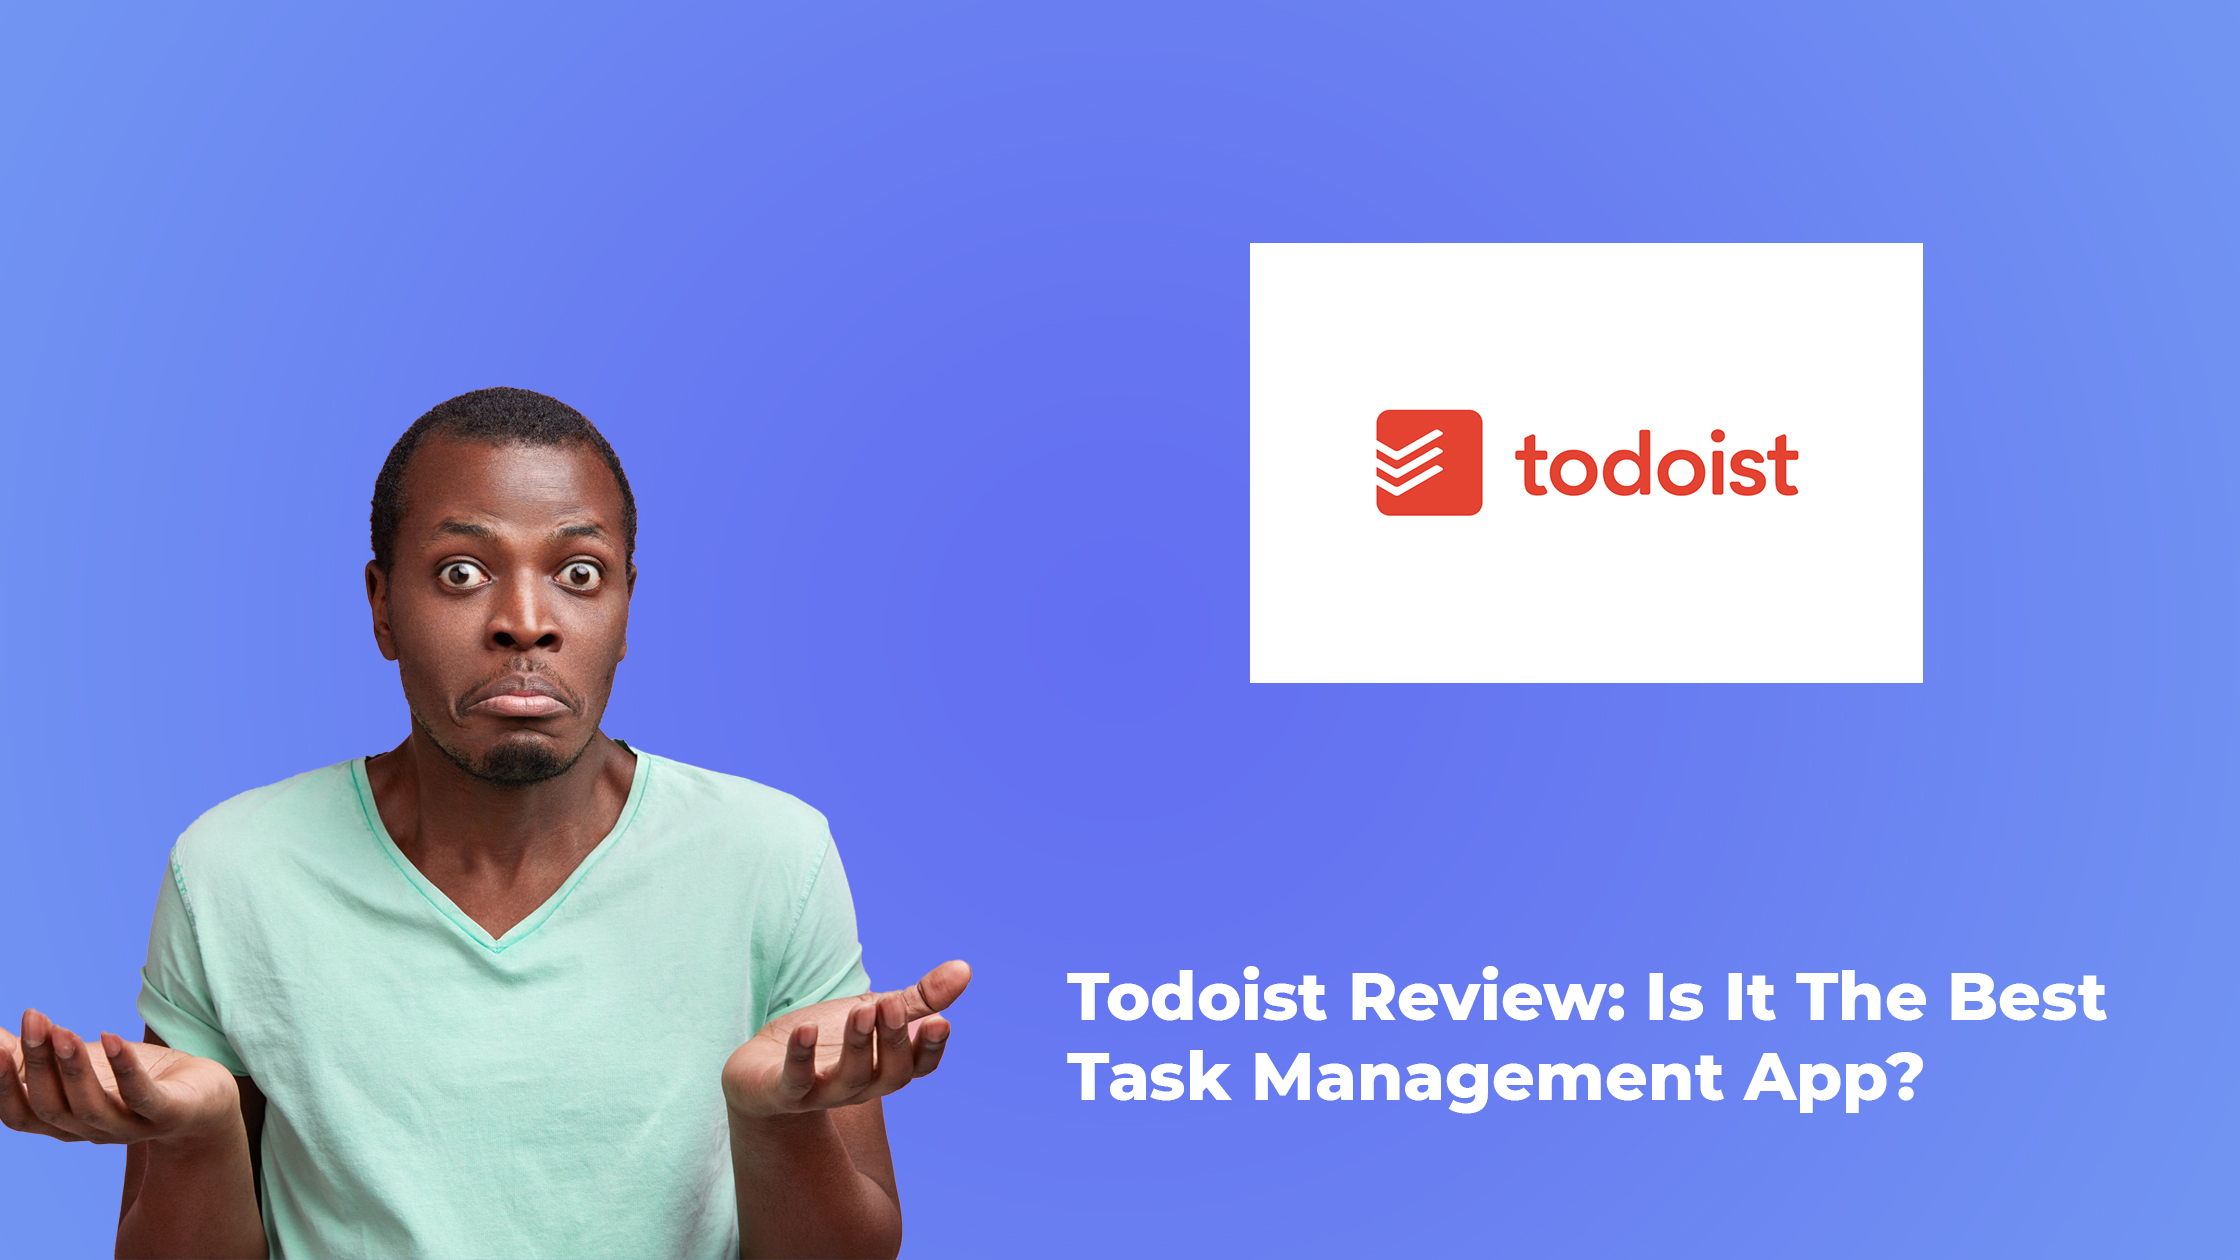 Todoist Review- Is It The Best Task Management App